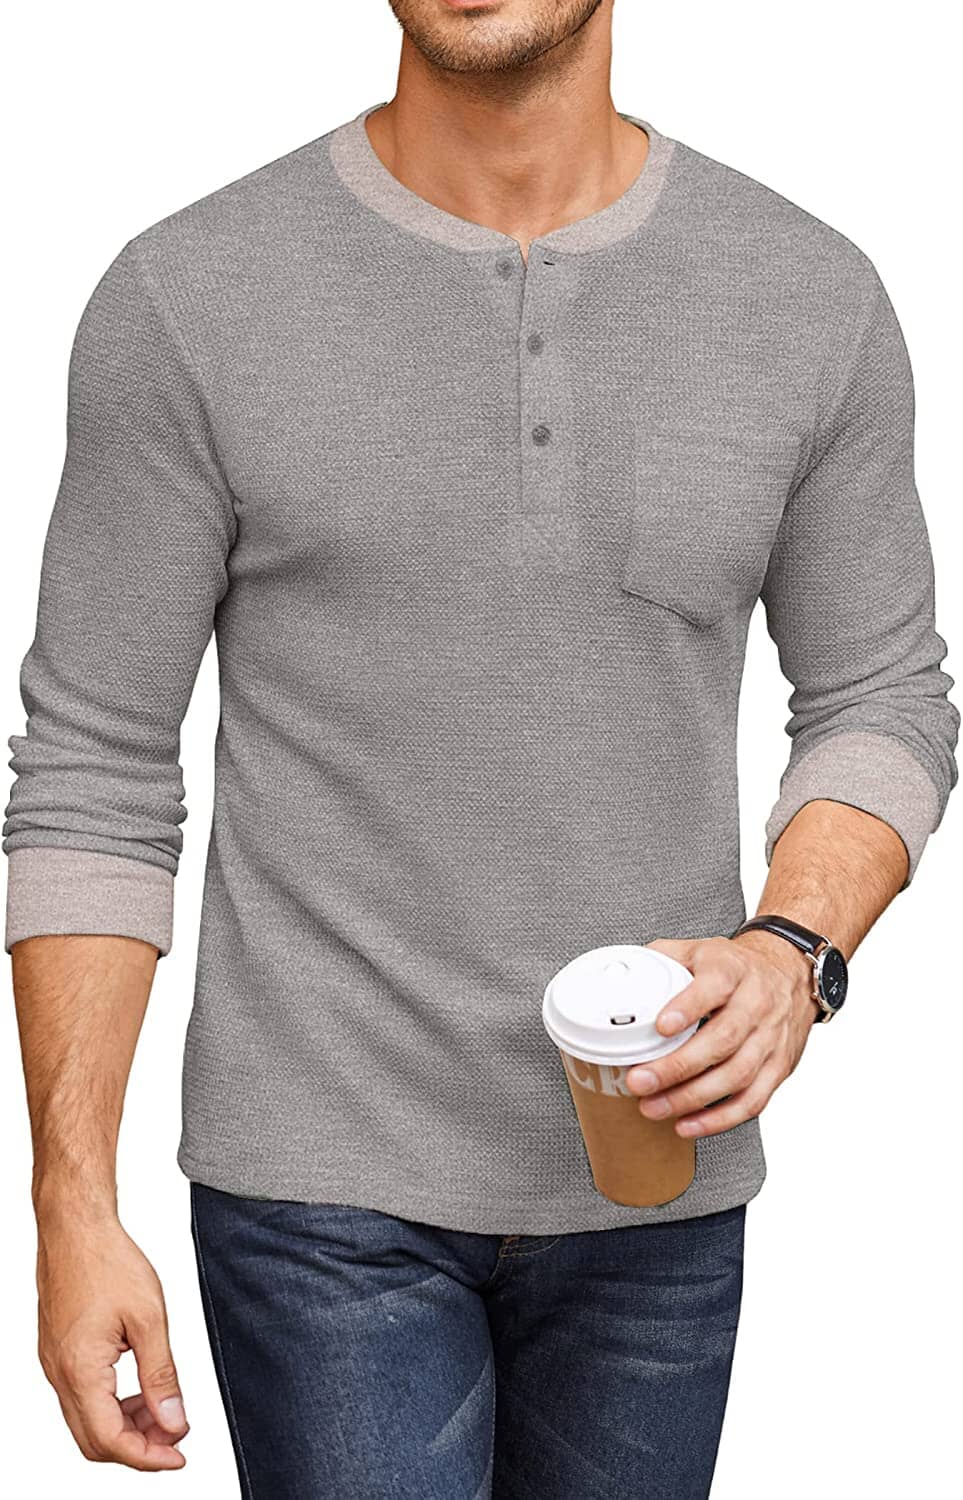 Basic Waffle Pullover Long Sleeve T-Shirt (US Only) T-Shirt Coofandy's Grey S 